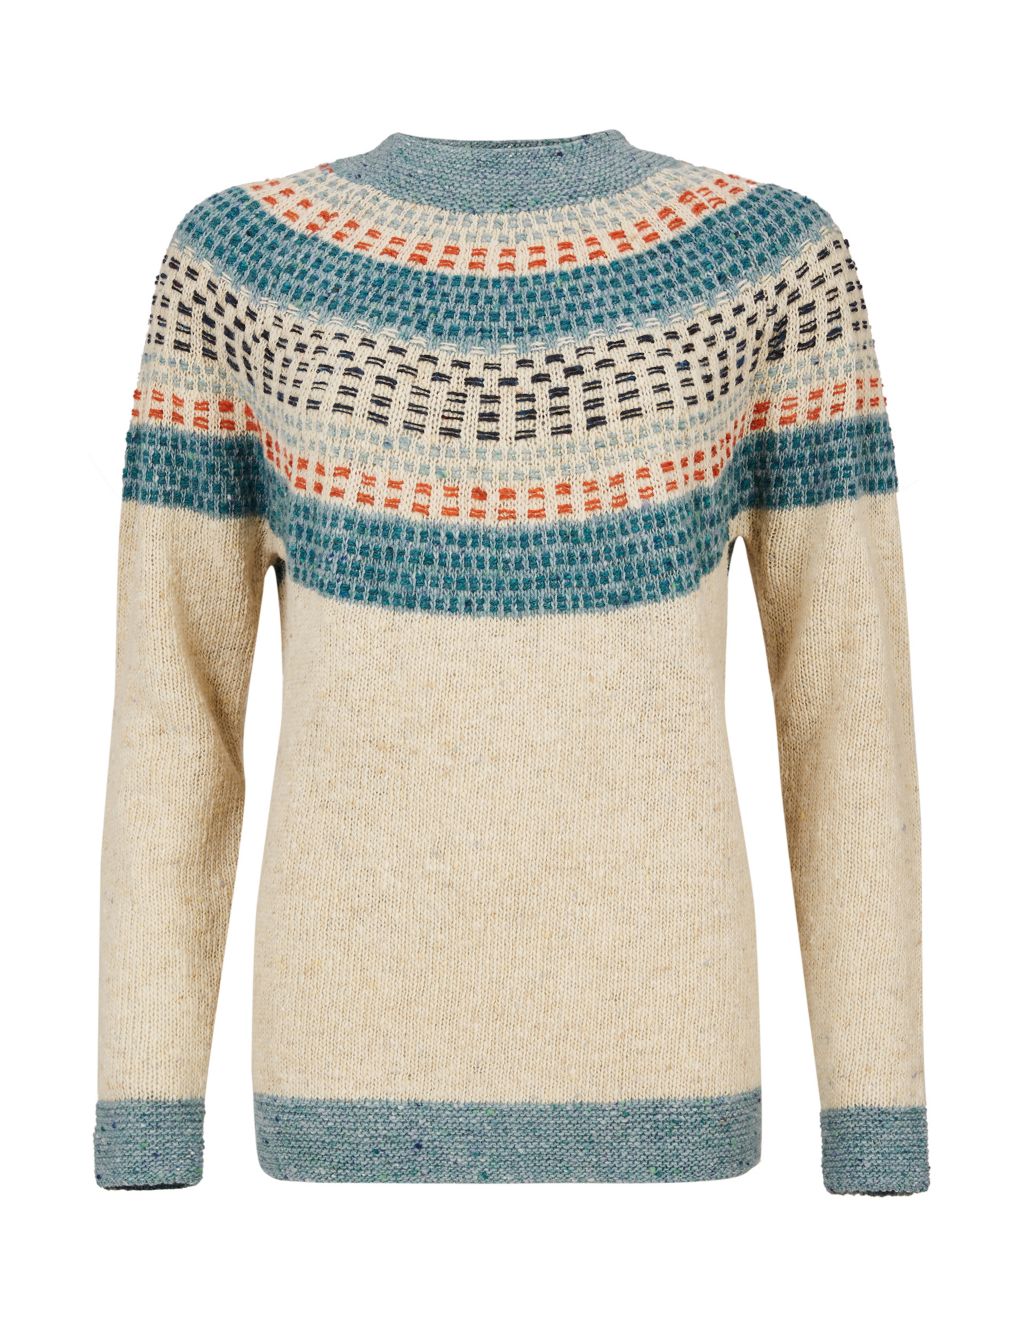 Pure Wool Patterned Crew Neck Jumper image 2